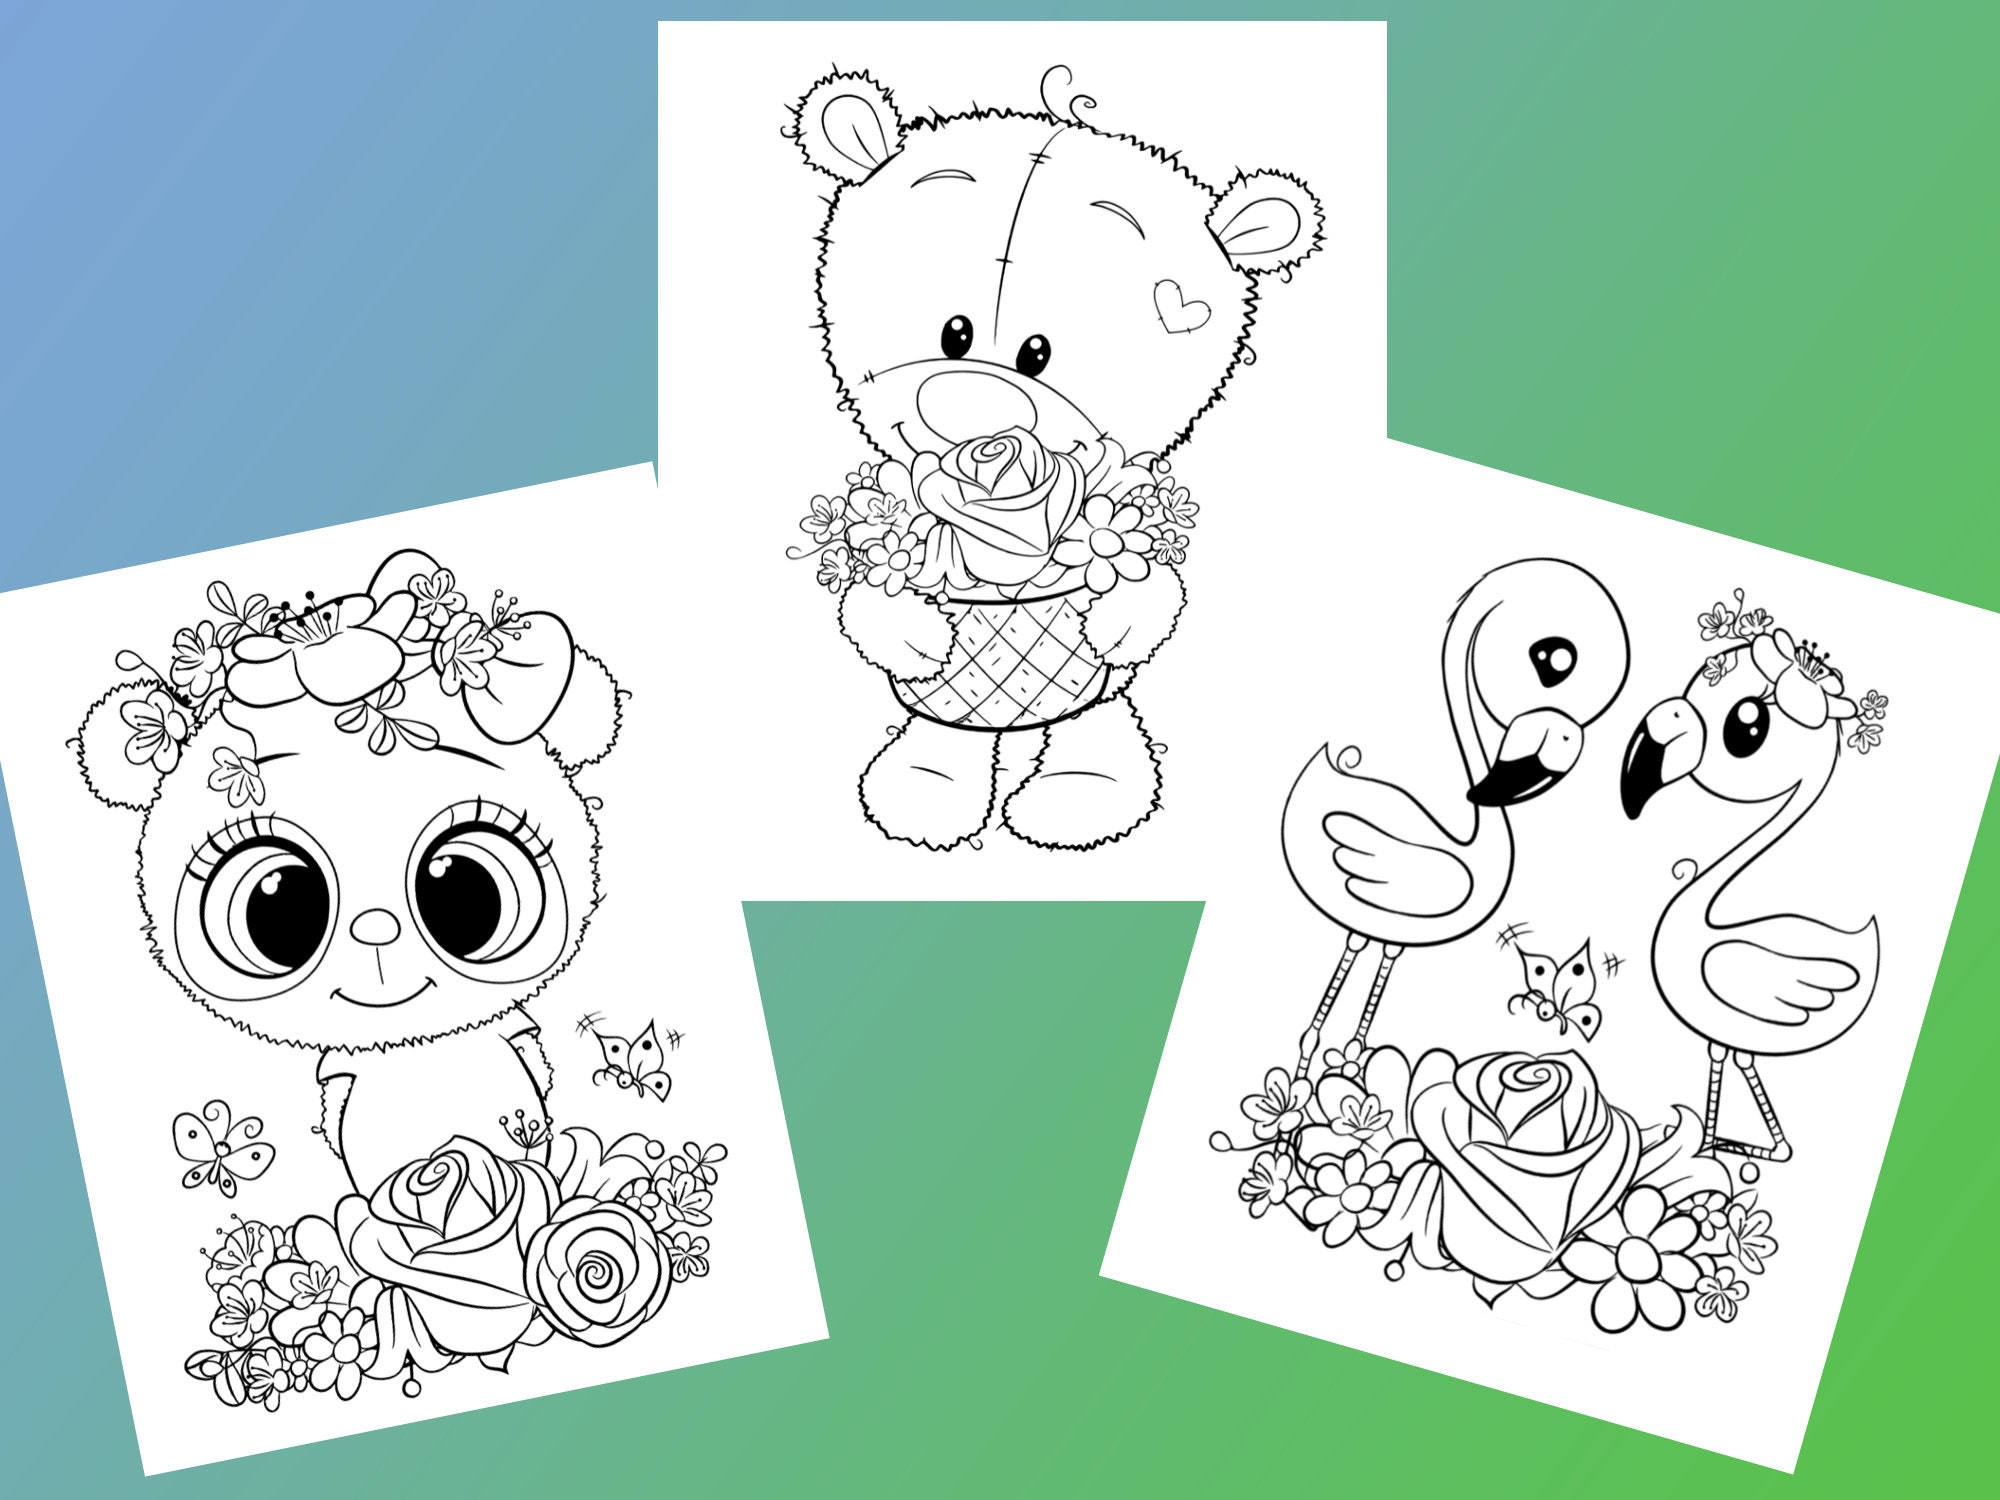 Coloring Books For Girls: Cute Animals: Relaxing Colouring Book for Girls,  Cute Horses, Birds, Owls, Elephants, Dogs, Cats, Turtles, Bears, Rabbits,  Ages 4-8, 9-12, 13-19 - Art Therapy Coloring: 9781641261036 - AbeBooks